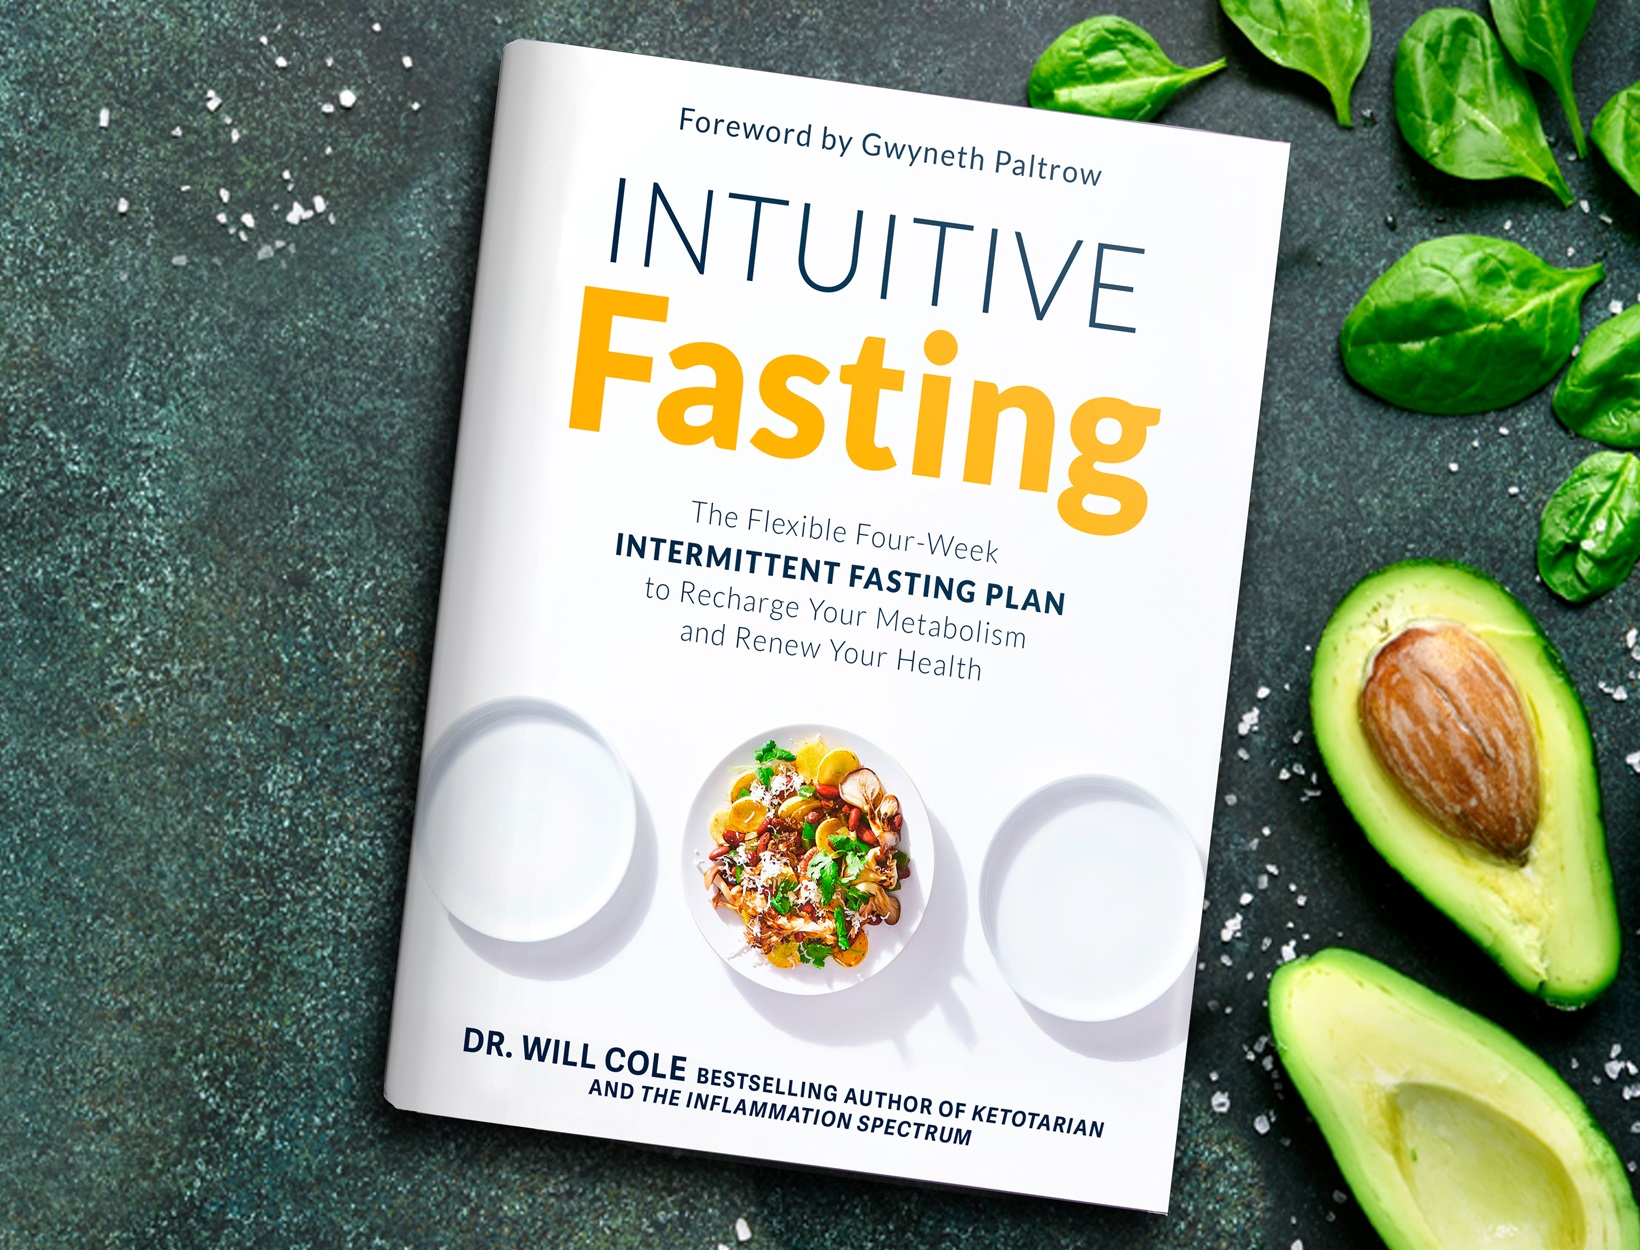 Intuitive fasting book